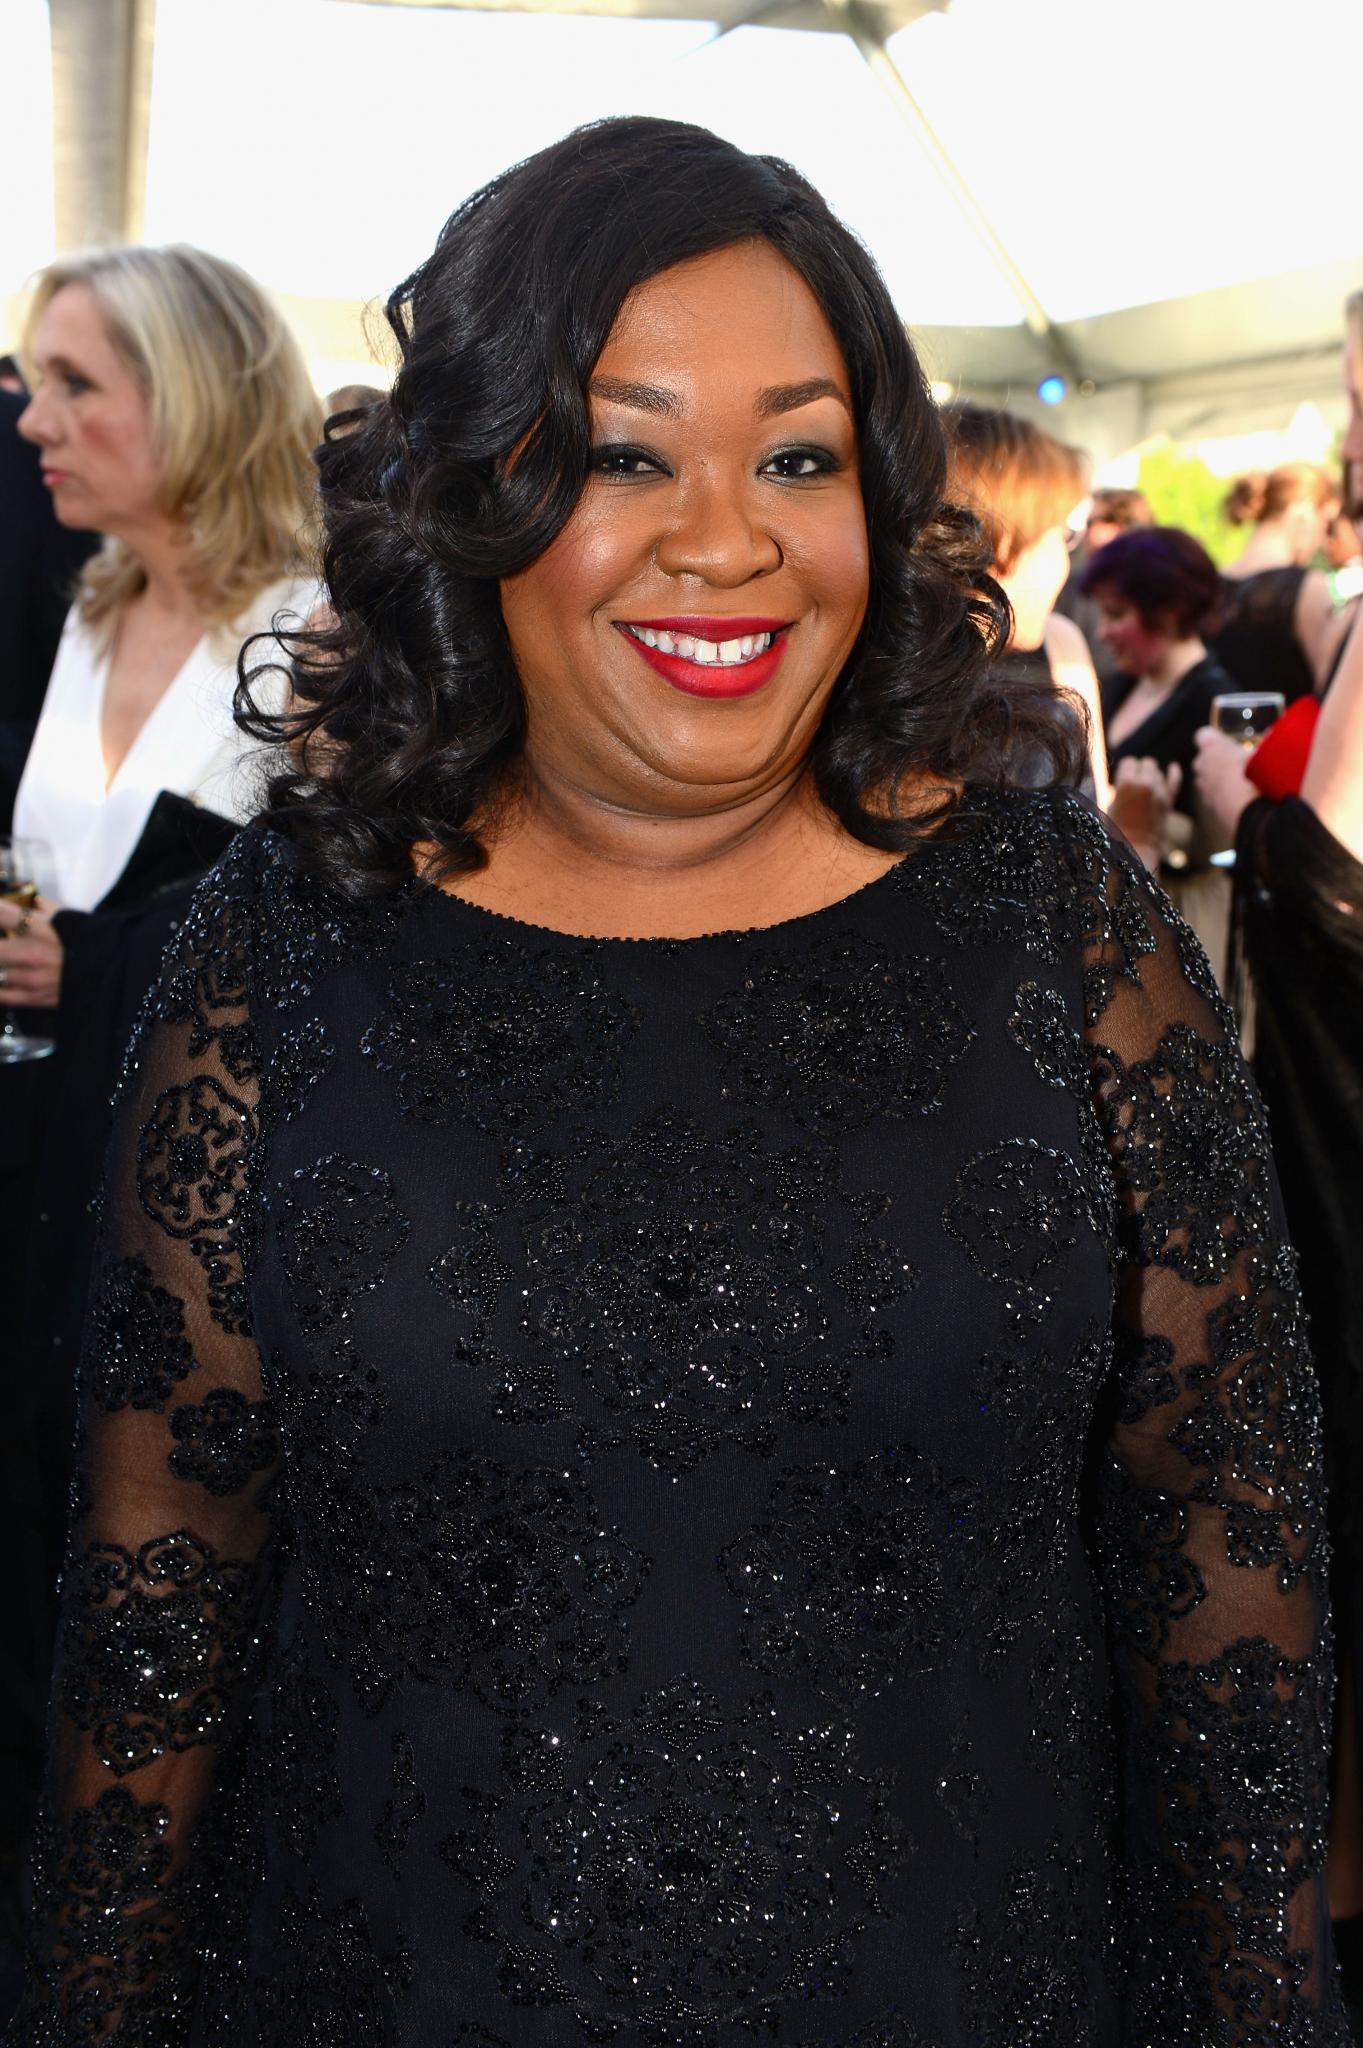 Shonda Rhimes to Be Honored for Creating Jobs for Women and Minorities